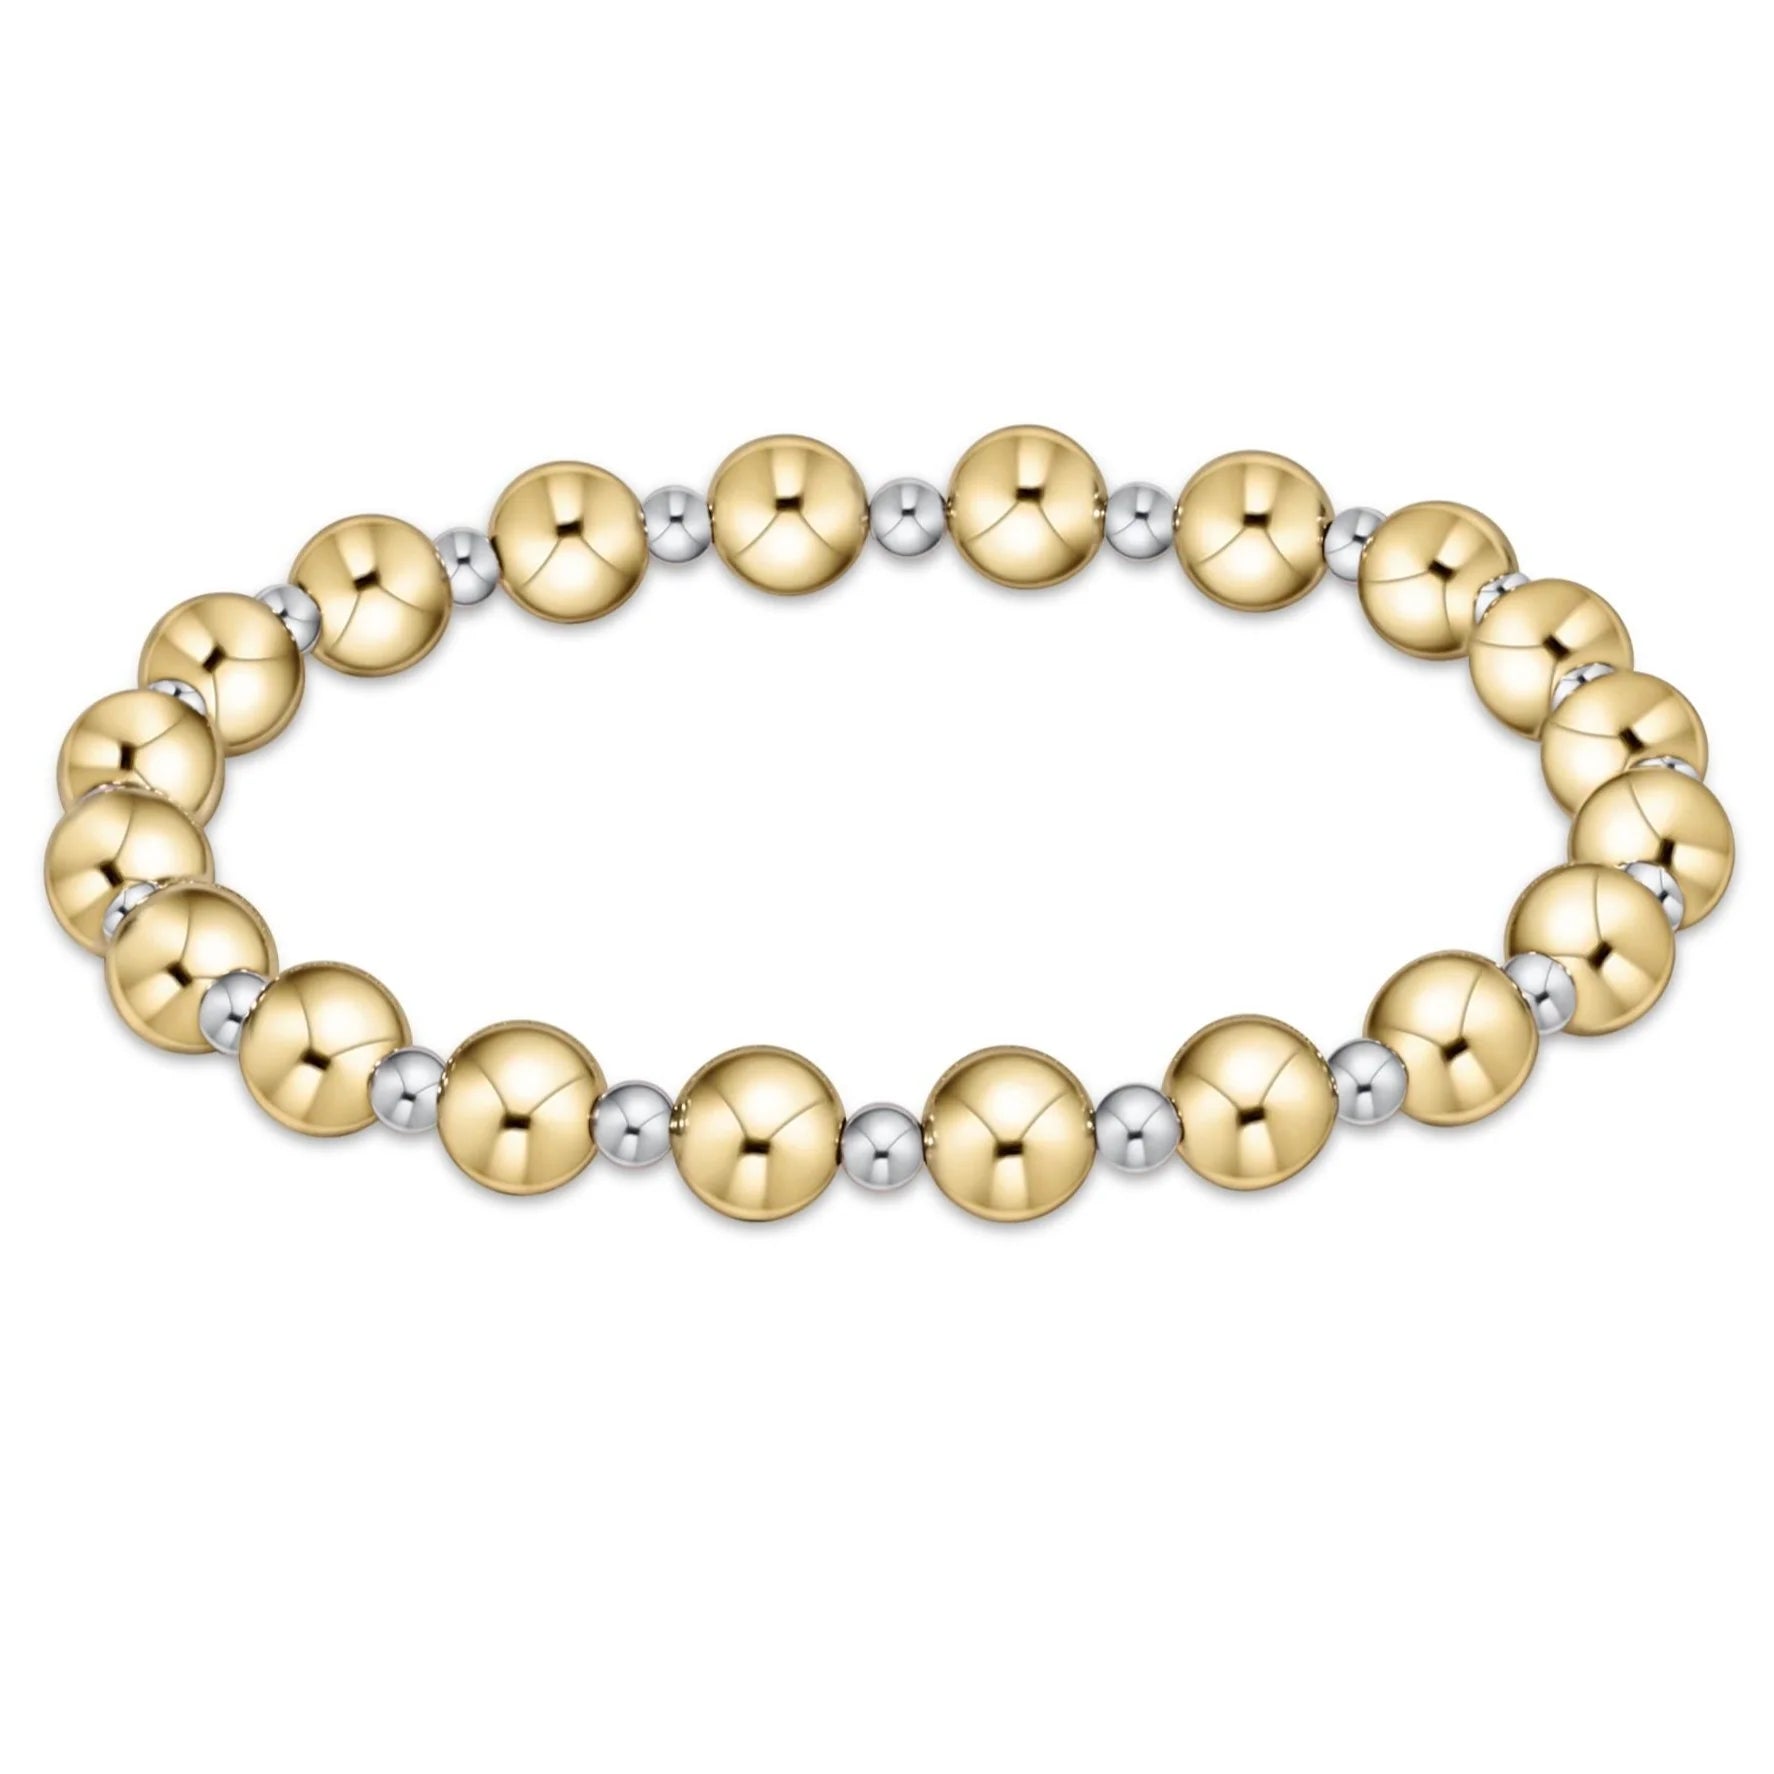 Silver and Gold Beaded Bracelet